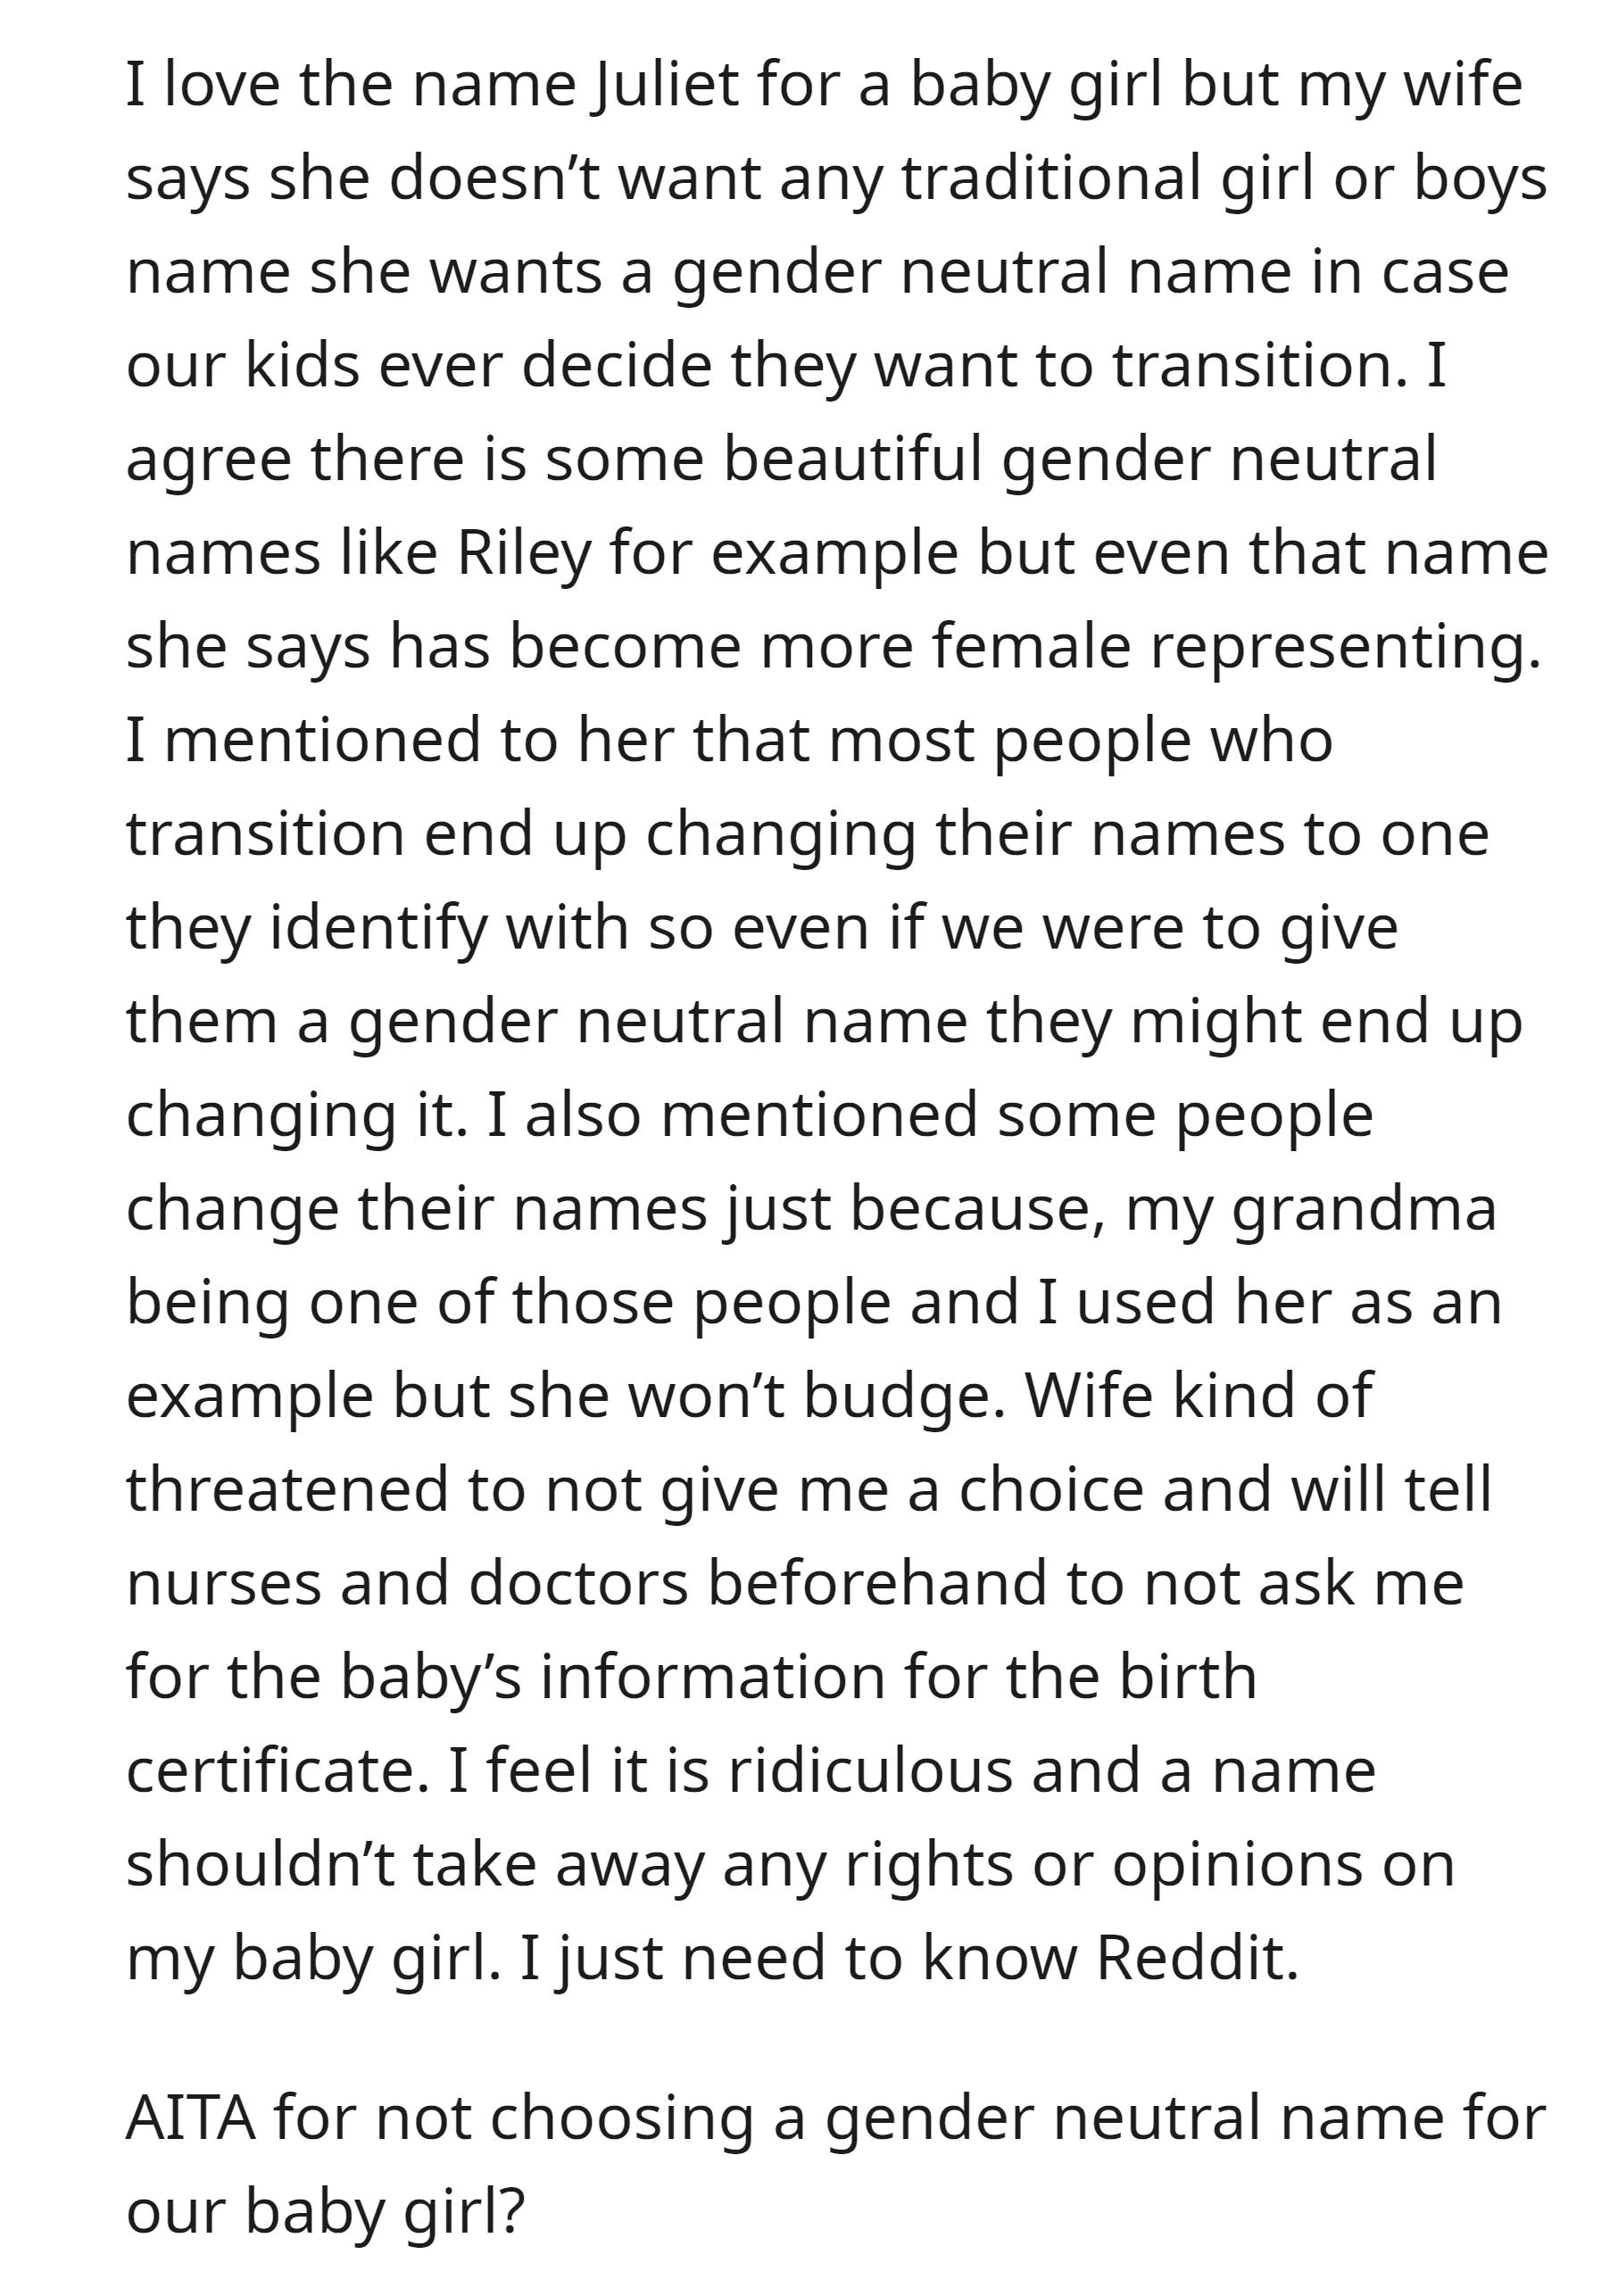 While the OP wants a female name, his wife wants a gender neutral name